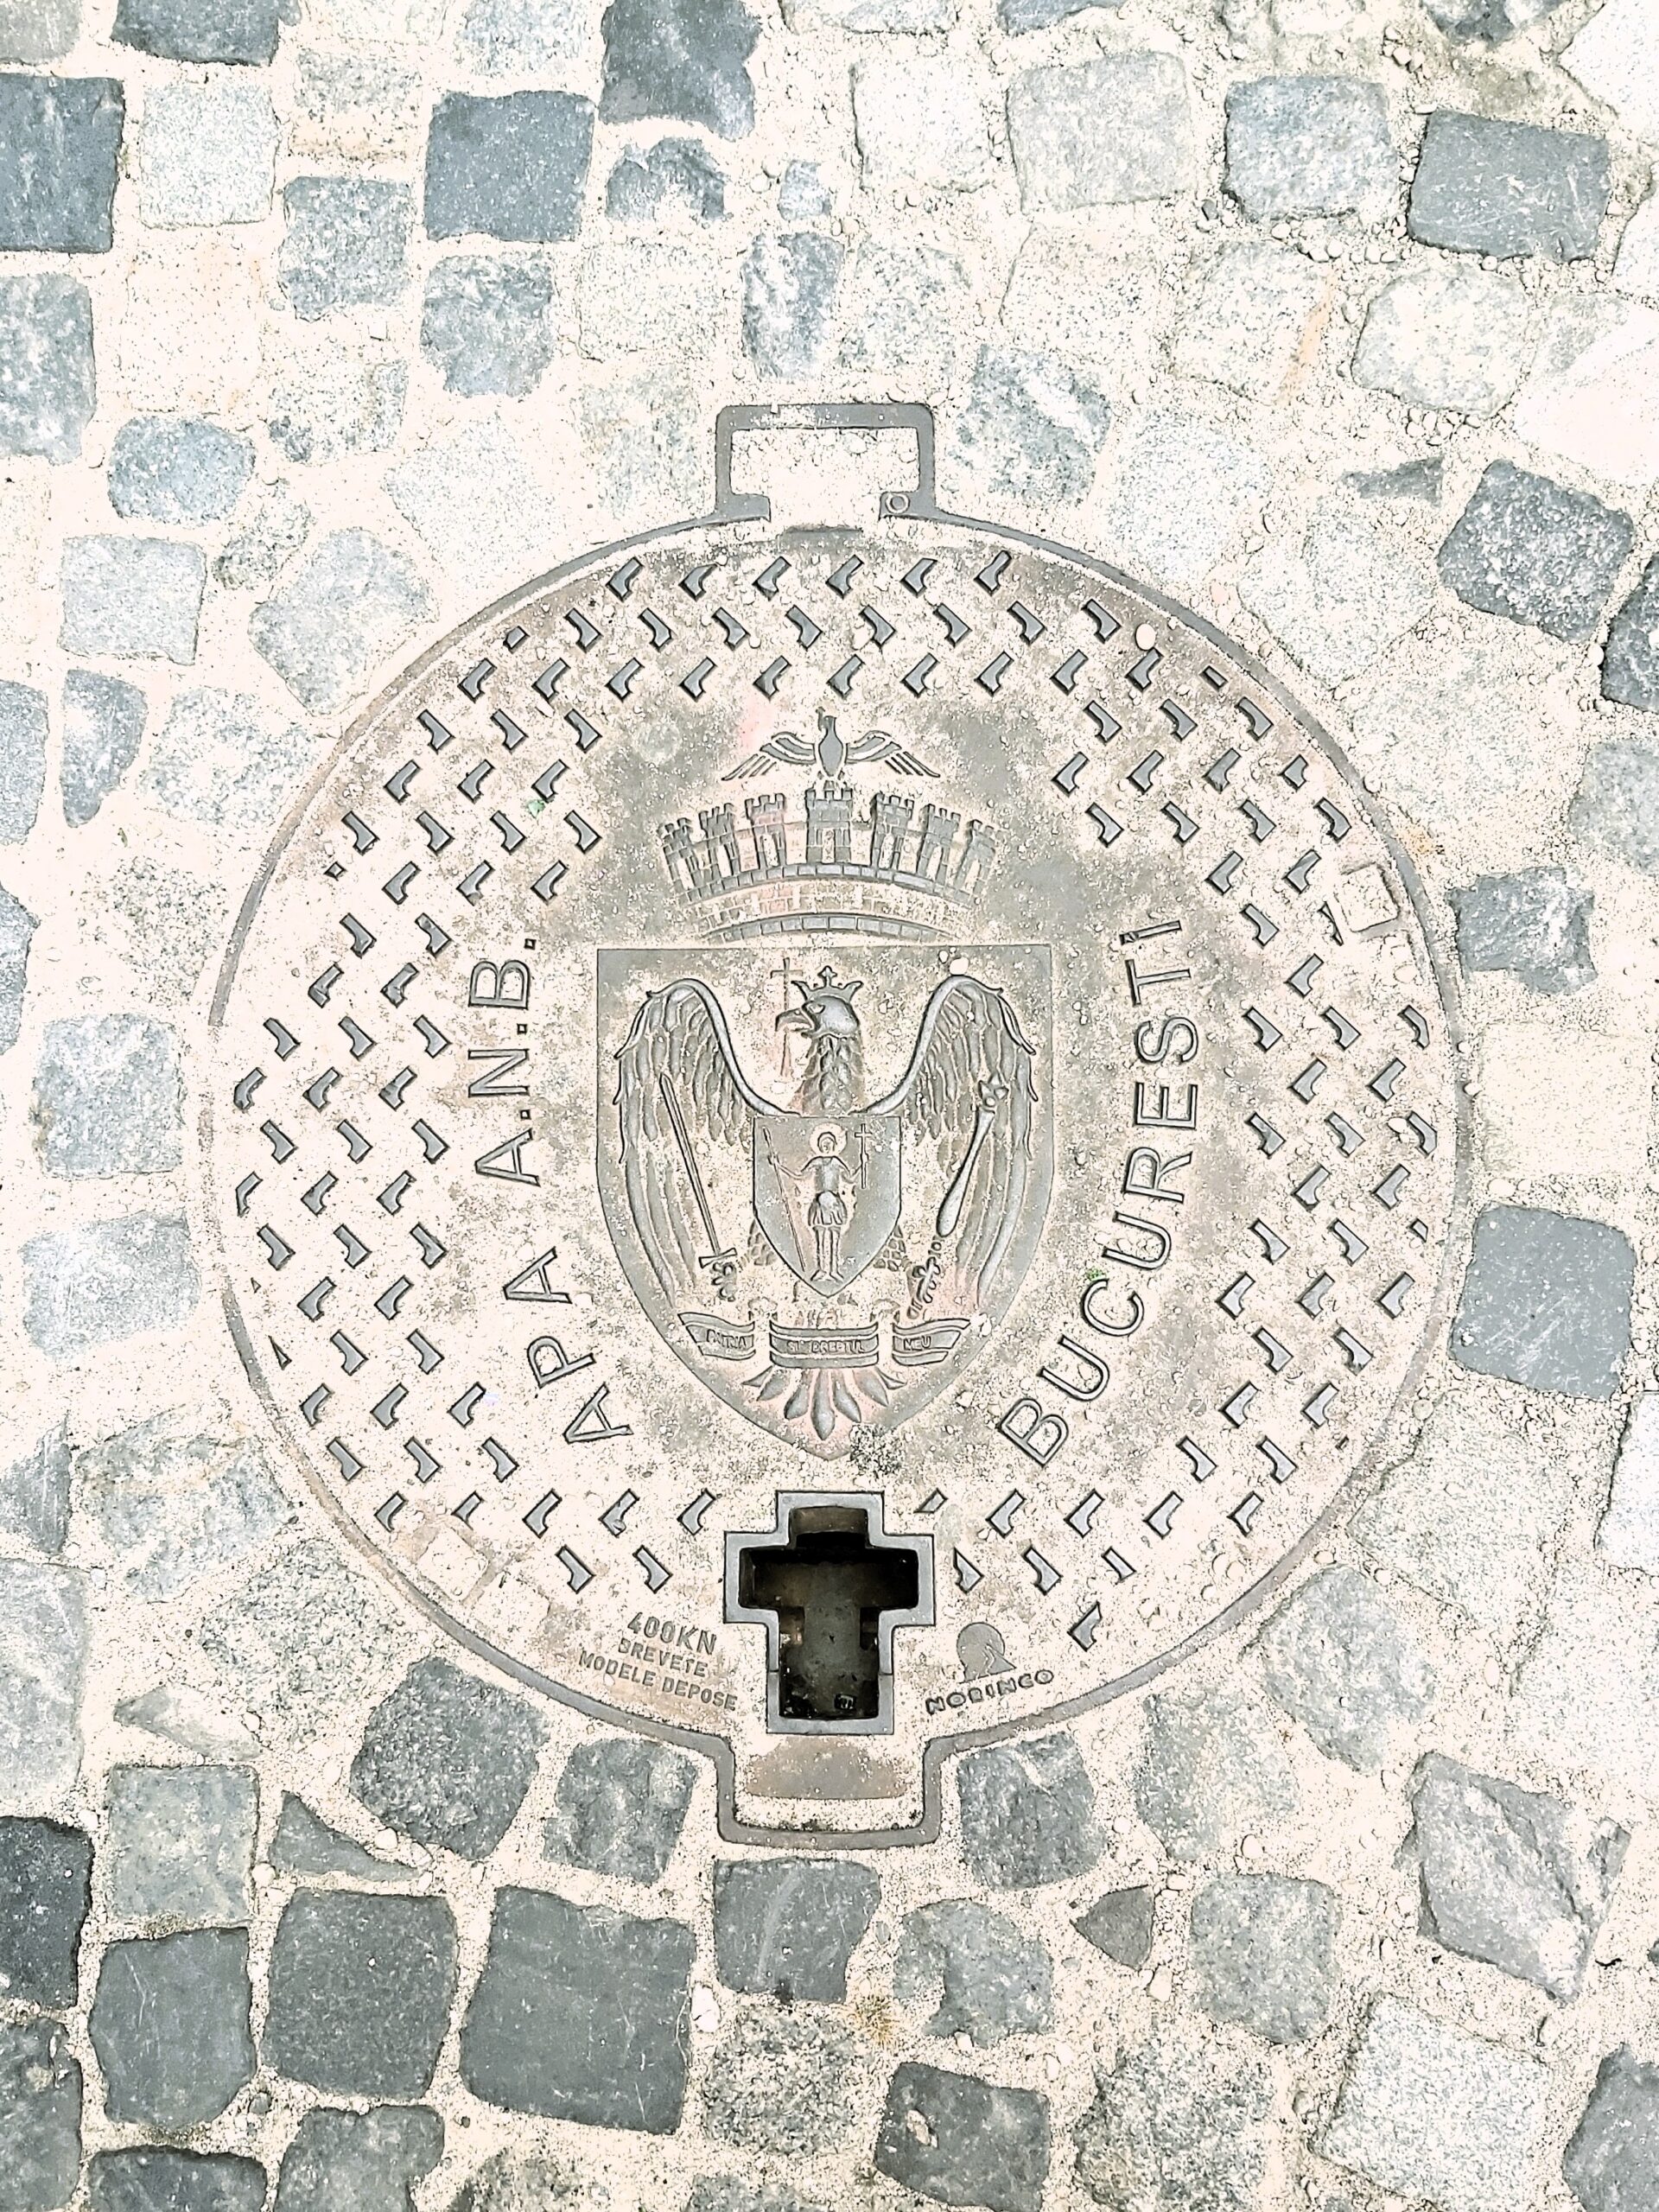 A drain cover with eagle coat of arms in București, Romania